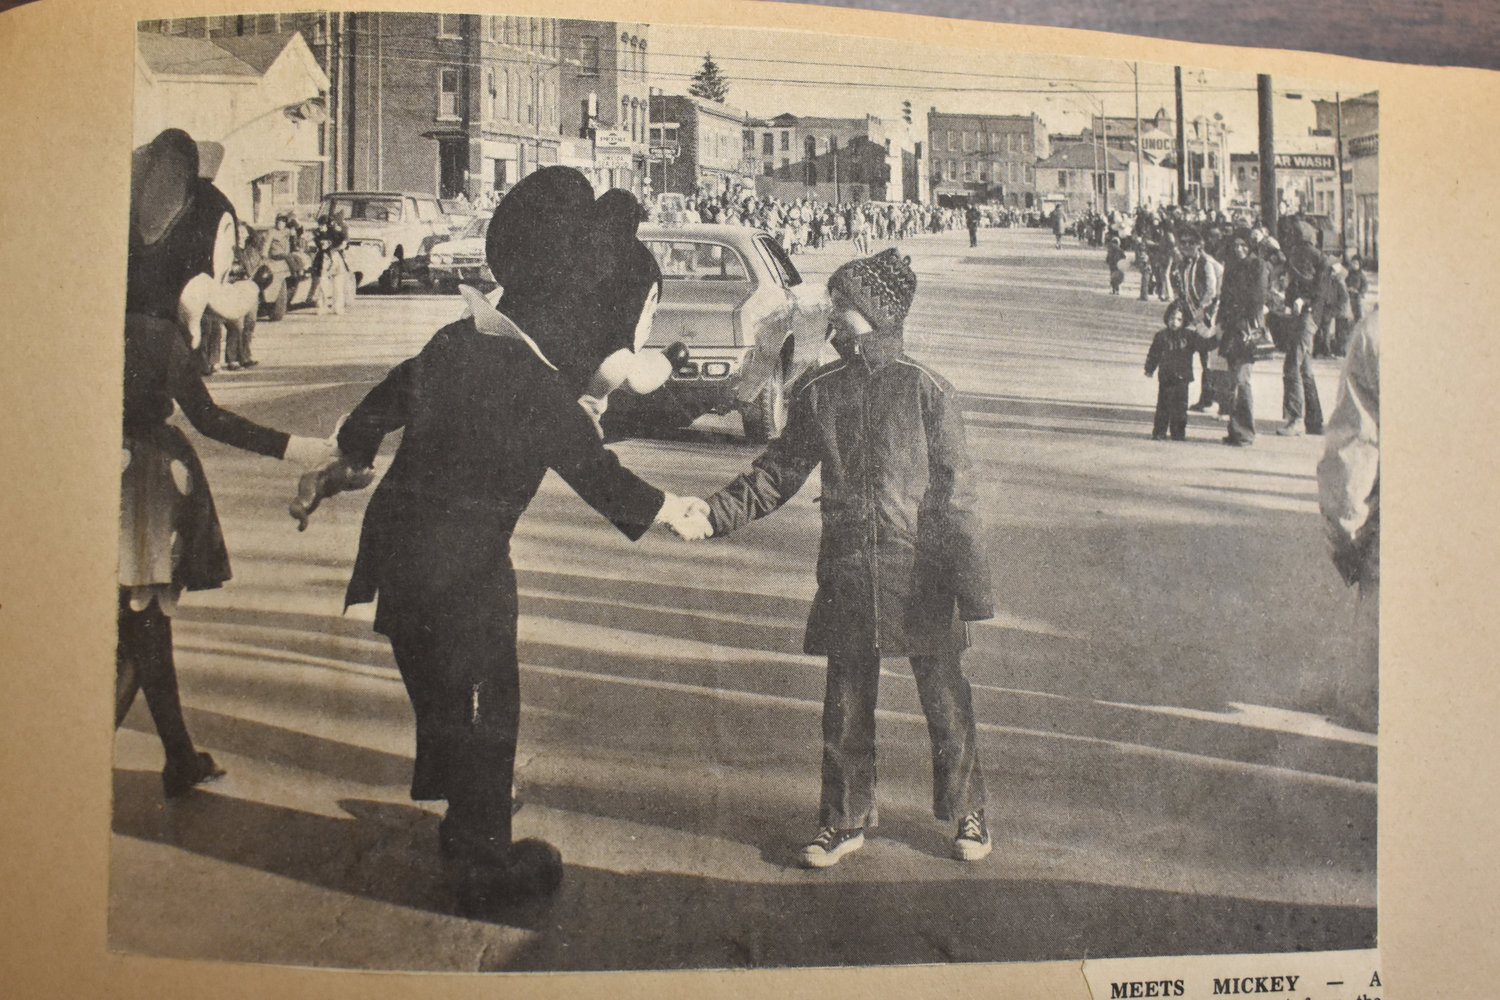 This newspaper photo is from downtown Oneida in the early 70s. Its caption reads: "Meets Mickey - A youngster steps out from the curb along the crowded Main St. to shake hands with Mickey Mouse who is holding Minnie Mouse's hand during the spring parade here. Other Disney characters in the parade were Cinderella and Freddy the Chimney Sweep. The Disney characters are in the area for Disney on Parade being held in Utica for a week beginning Tuesday."